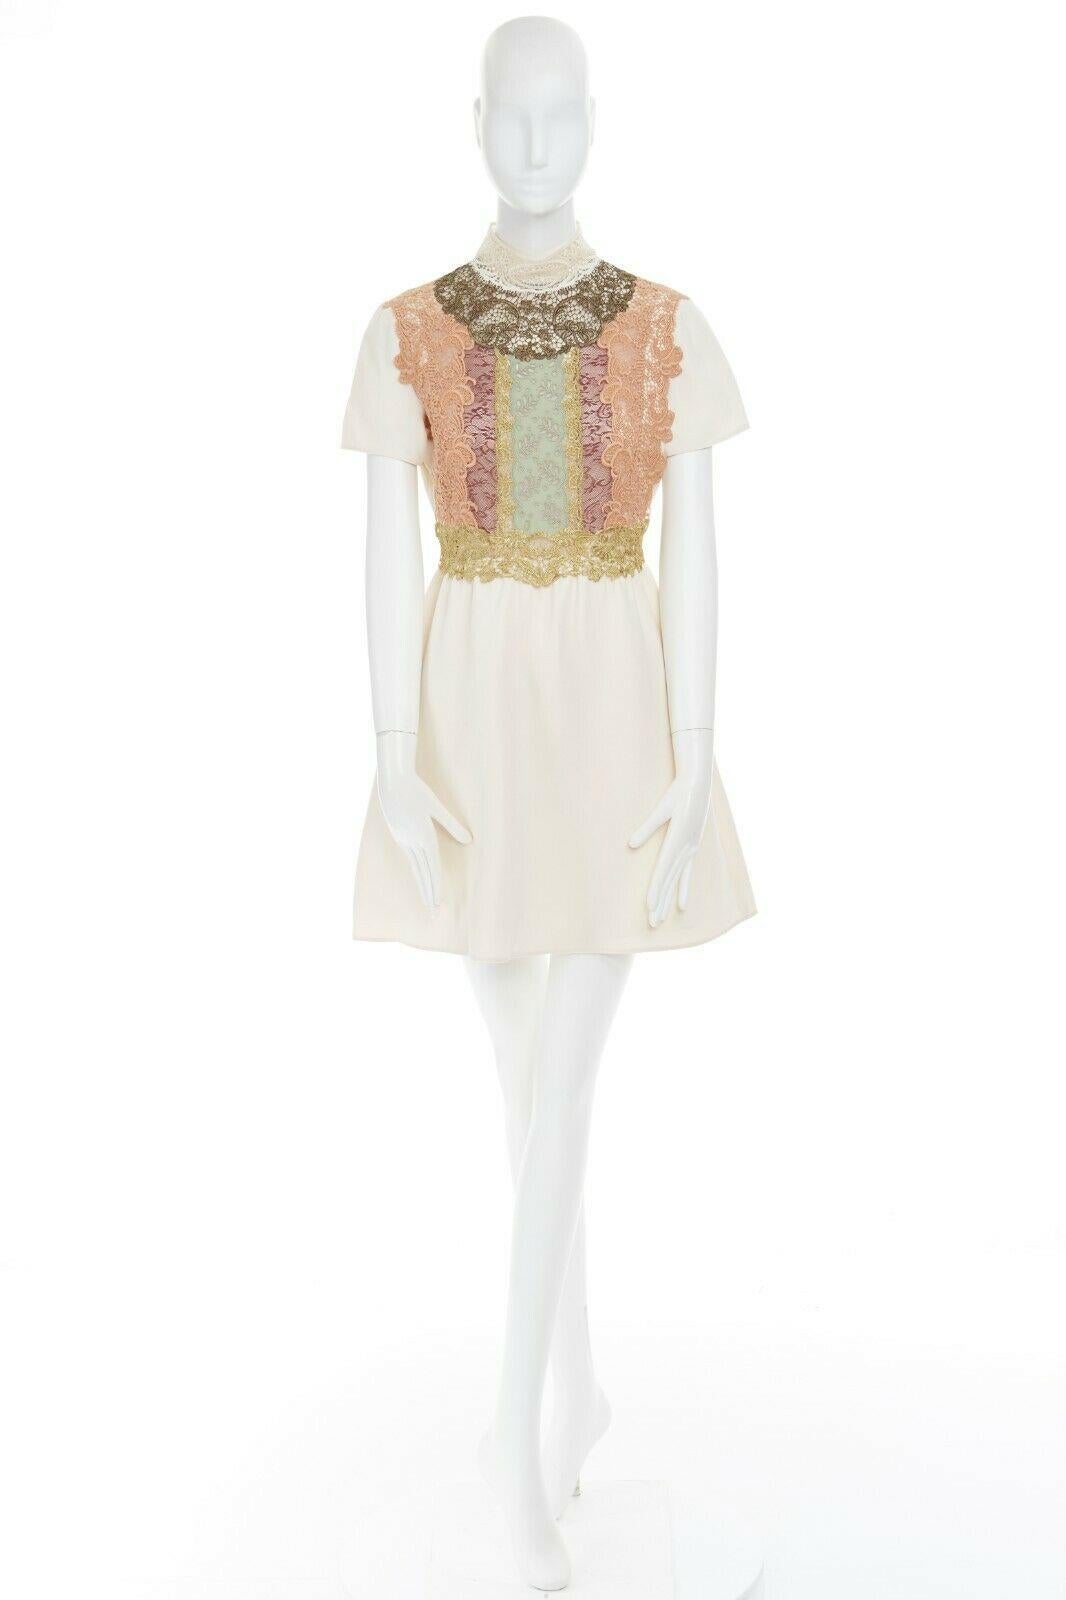 VALENTINO cream wool silk crepe embroidered lace high collar cocktail dress IT42 Reference: LACG/A00271 
Brand: Valentino 
Material: Virgin Wool 
Color: Cream 
Pattern: Other 
Closure: Zip 
Extra Detail: Virgin wool, silk. Cream crepe. High lace